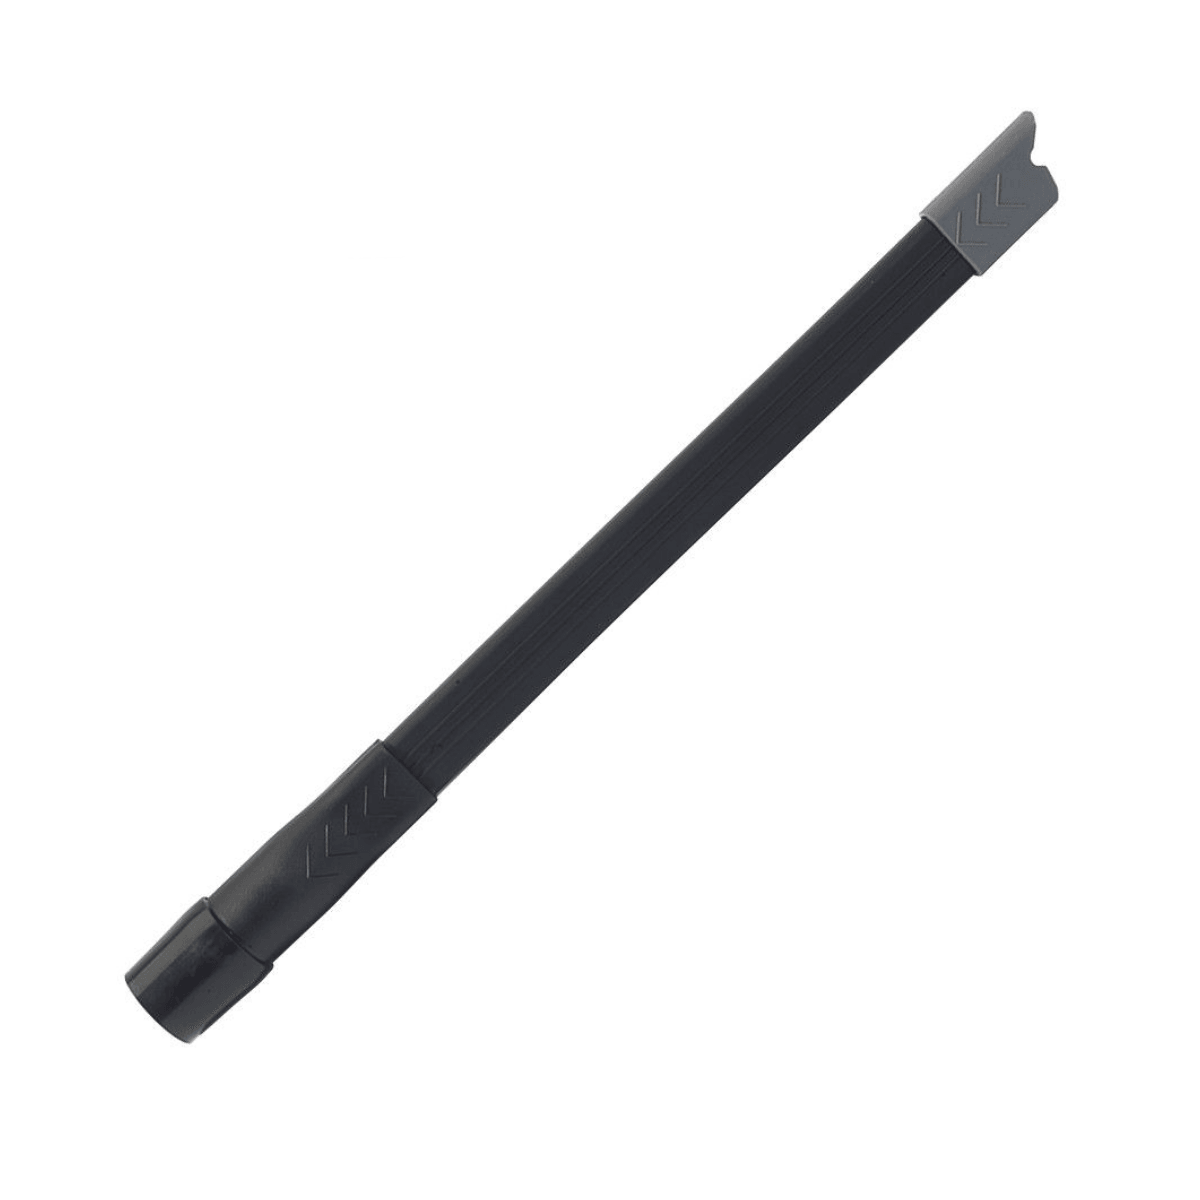 Genuine Numatic Henry Flexi Crevice Tool 907486 - Henry Hoover Parts